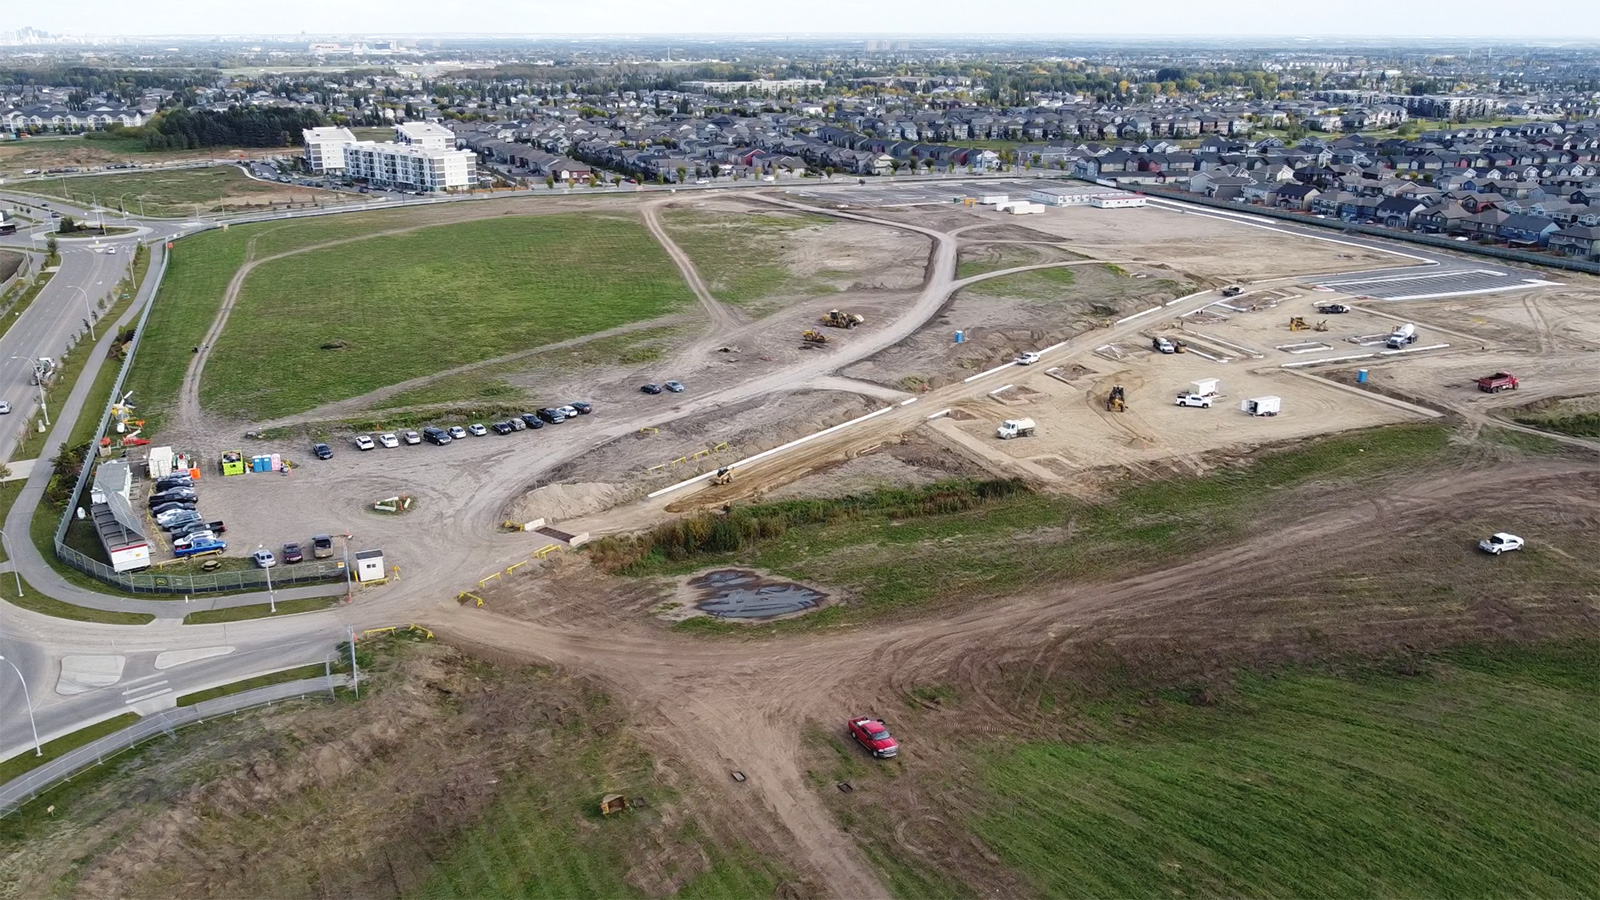 Northwest view of the site showing casing, the trailer complex setups and the ongoing parking lot development